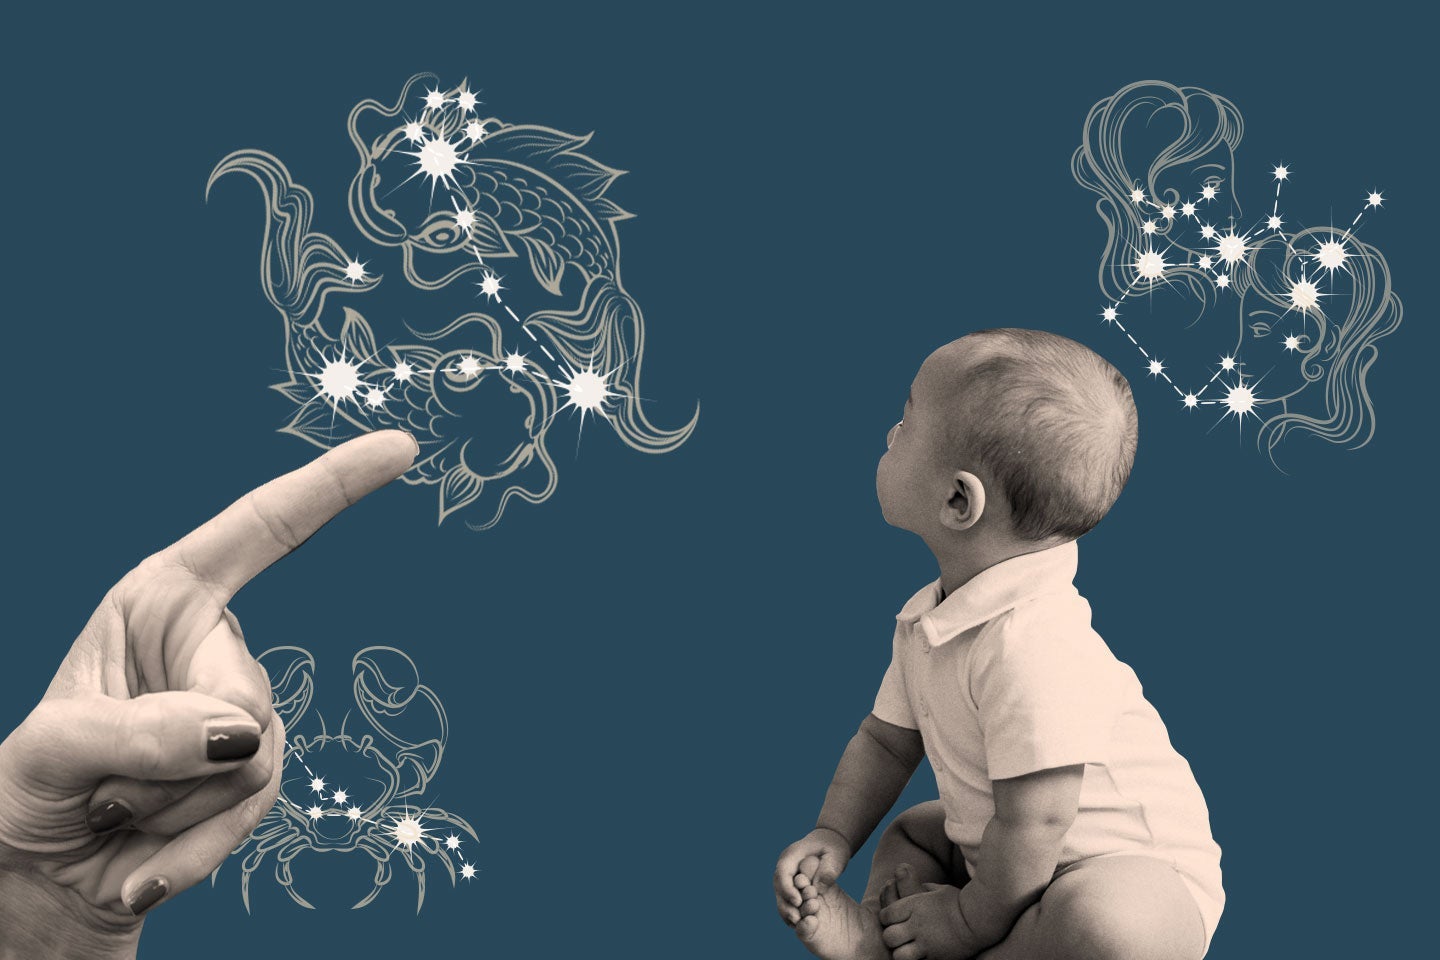 A grown-up hand pointing at a an illustration that represents the signs of the zodiac, as an infant looks toward them.